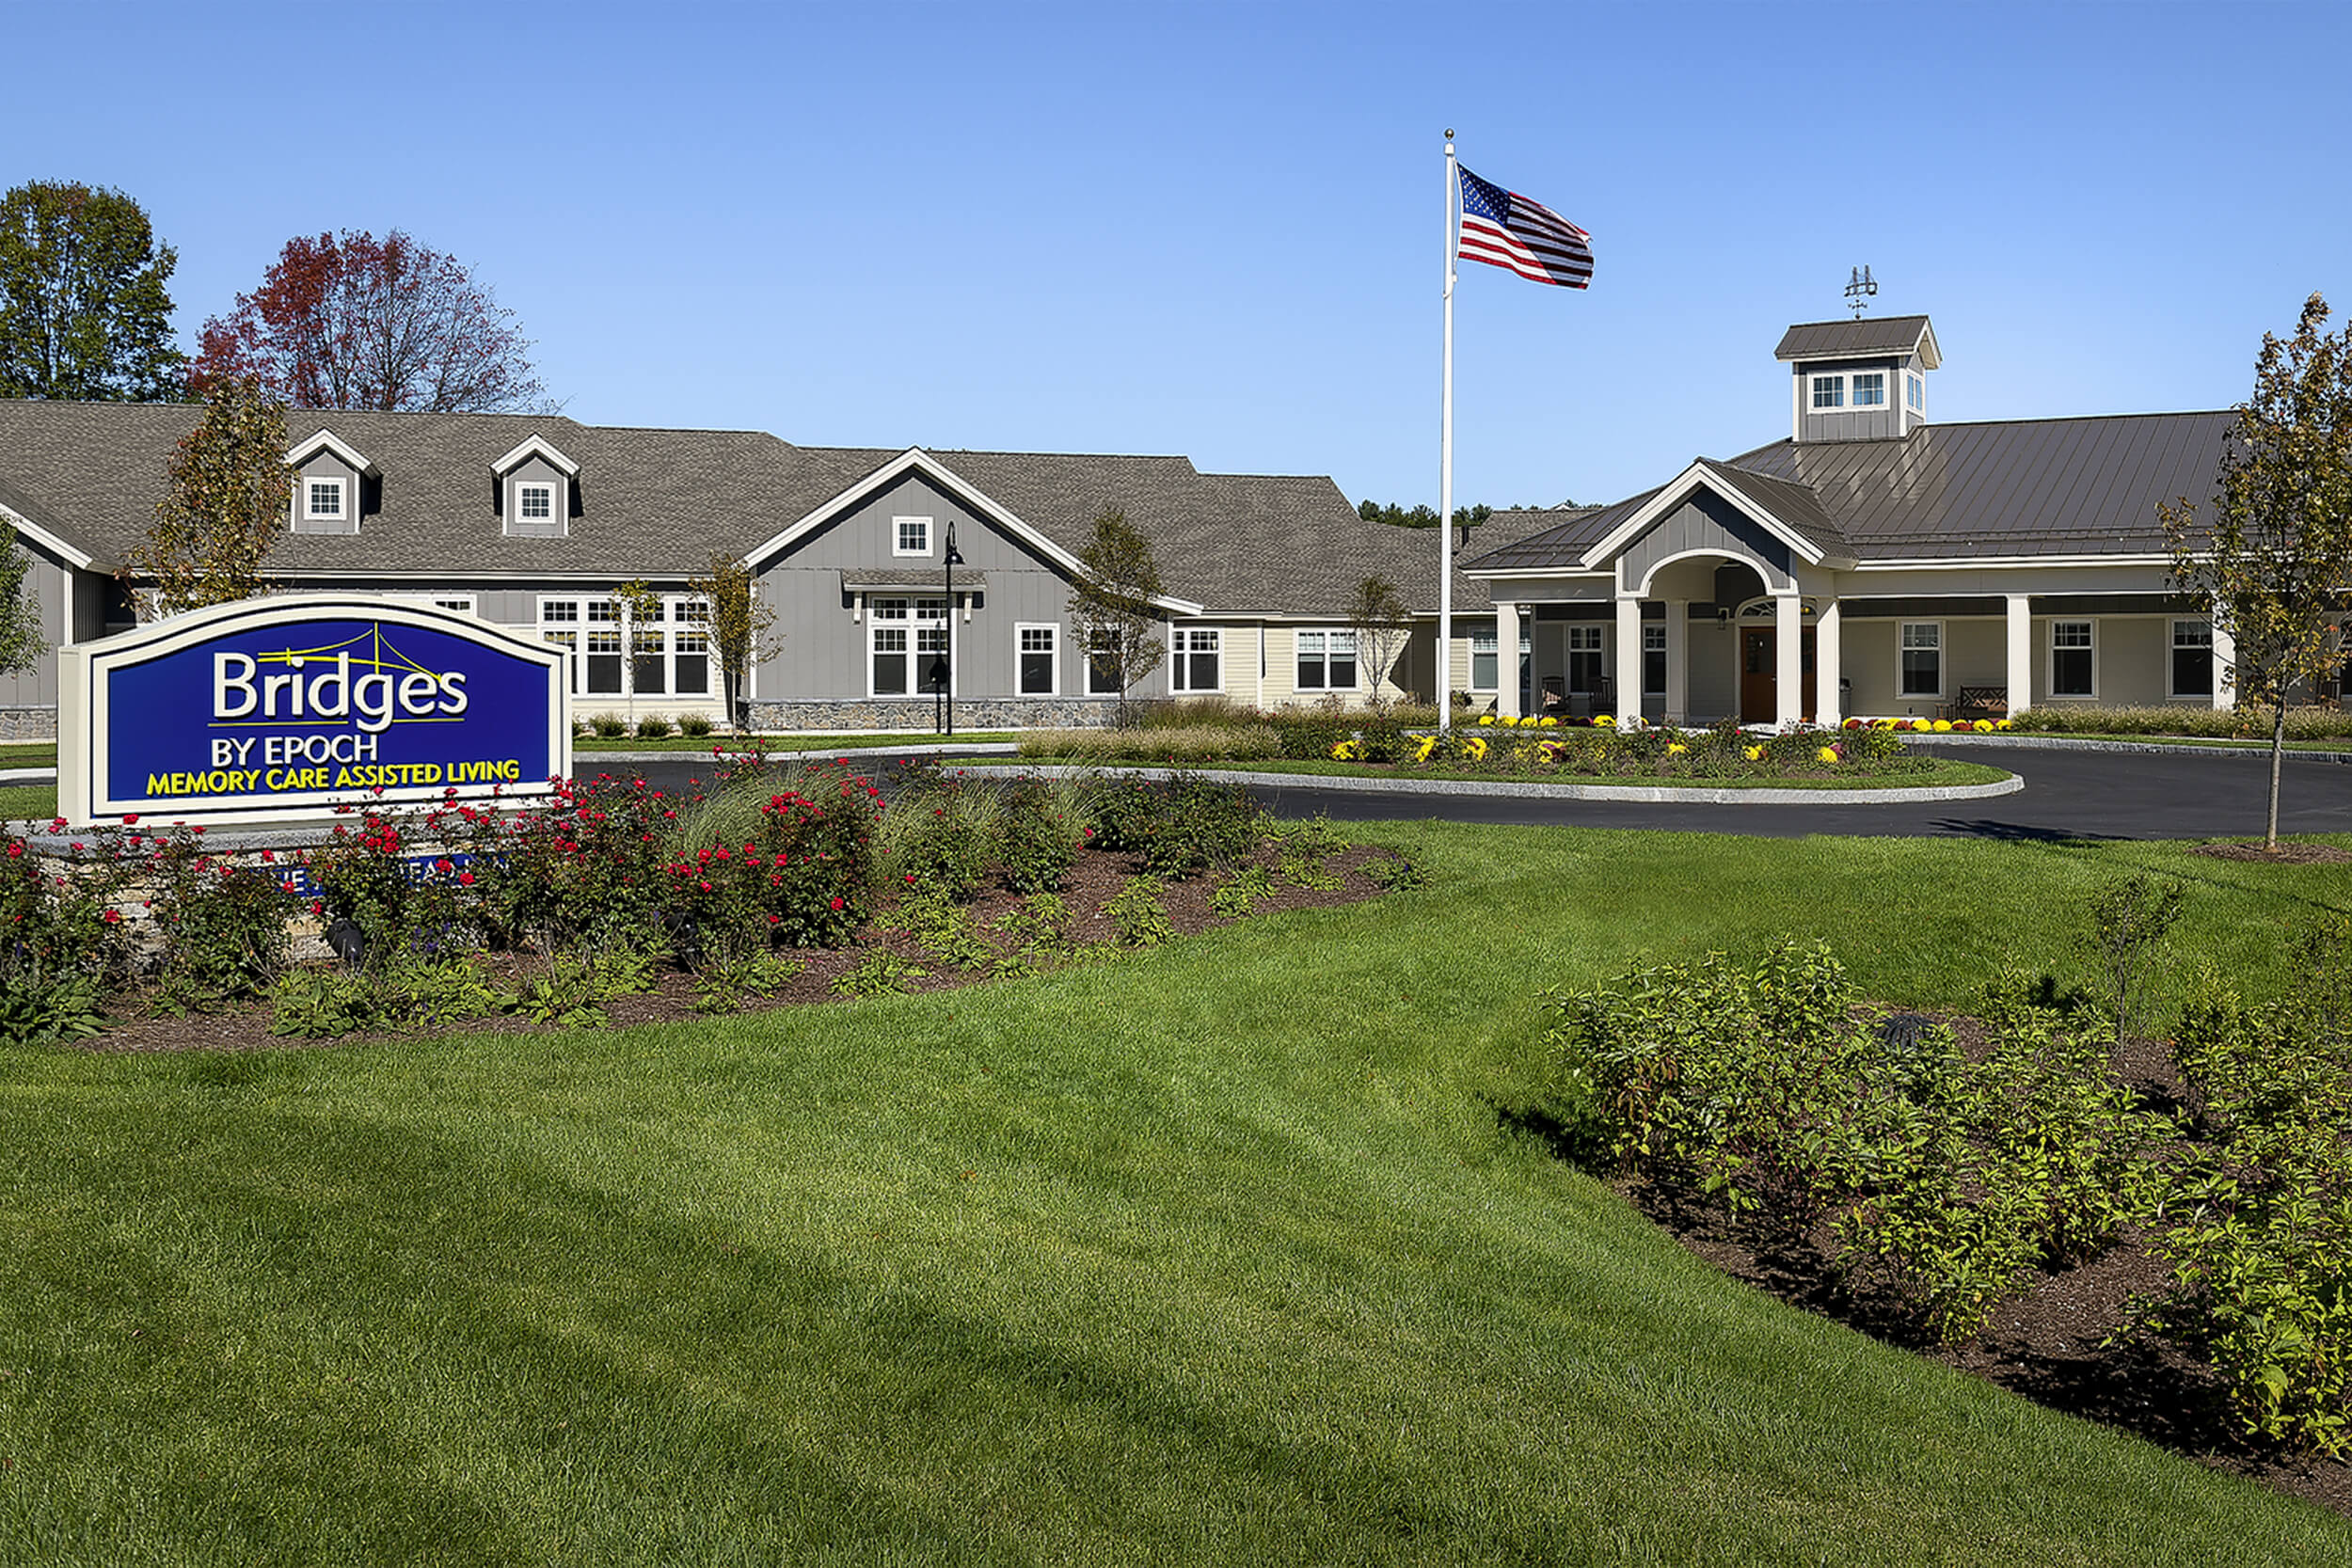 Exterior daytime view of a senior living facility. A large grassy lawn stretches in front of the building with a sign reading "Bridge by Epoch"